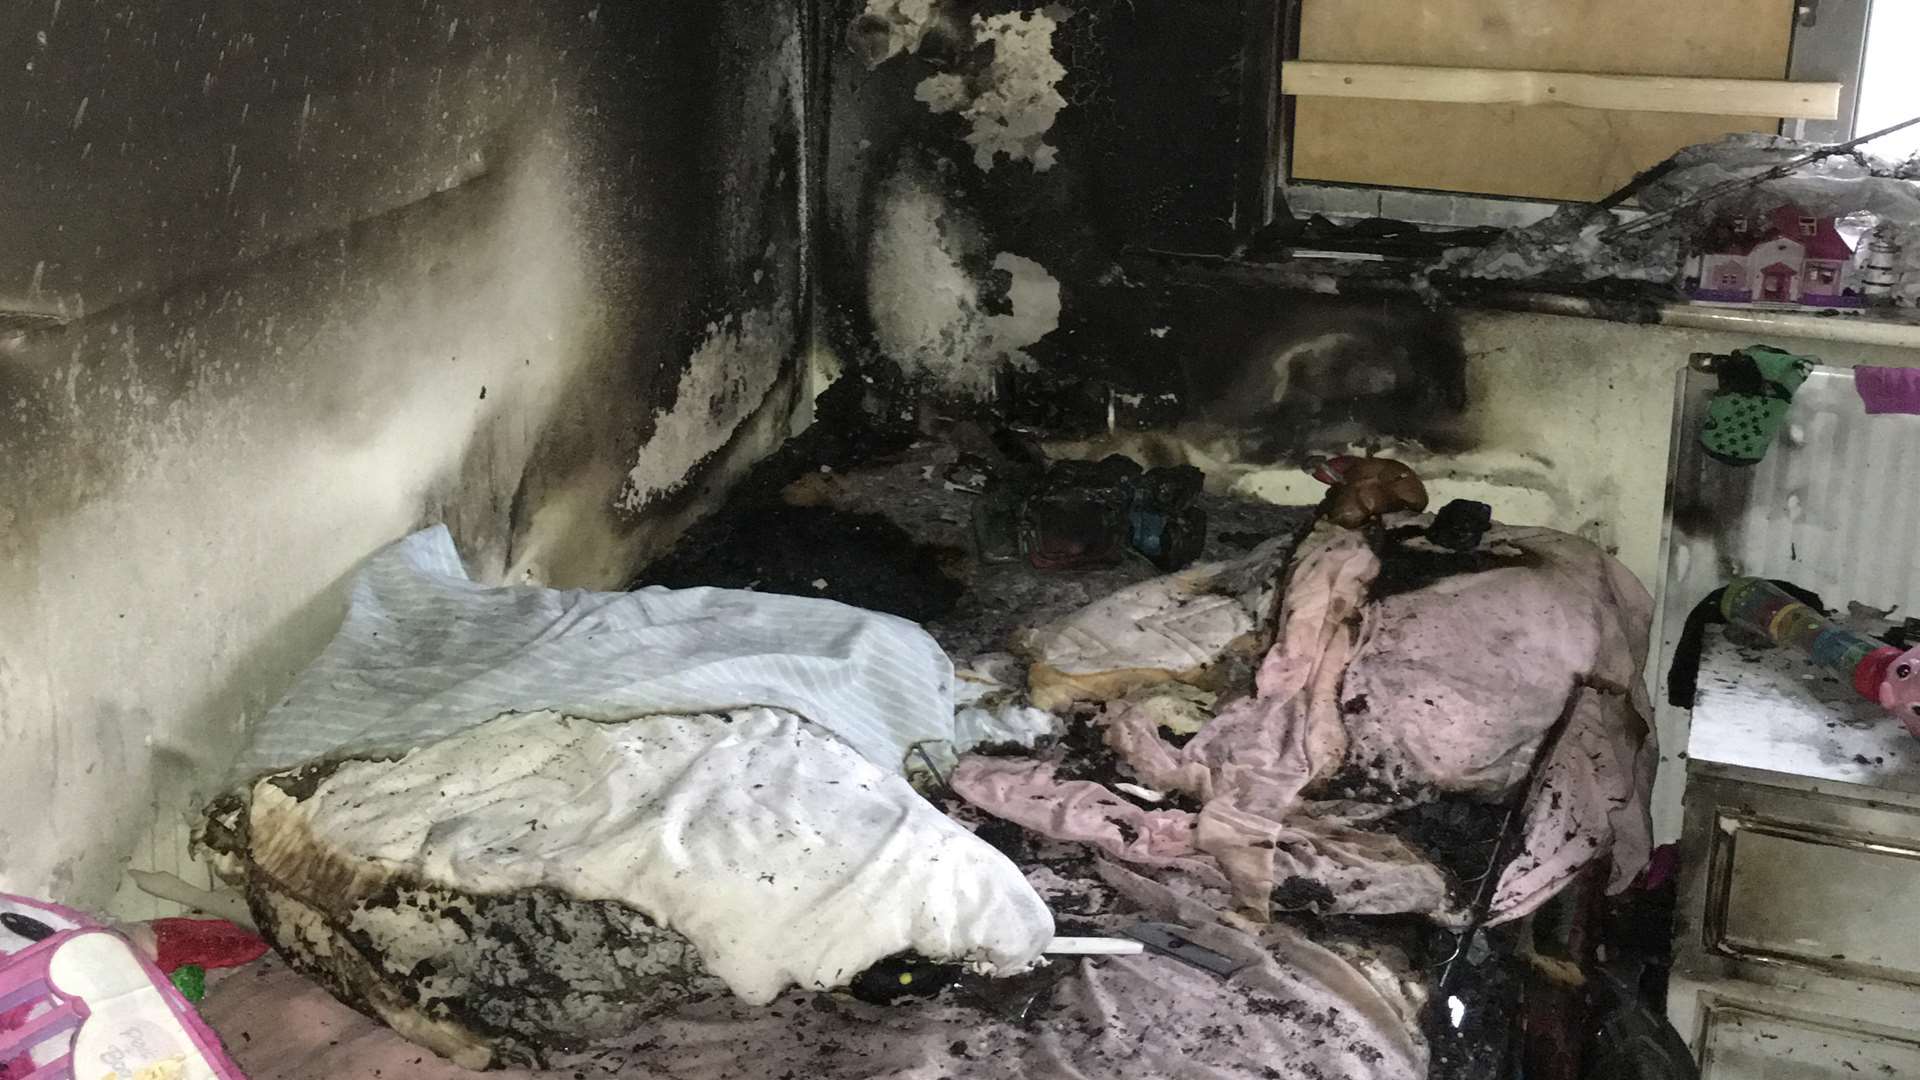 The fire started in Connie's bedroom